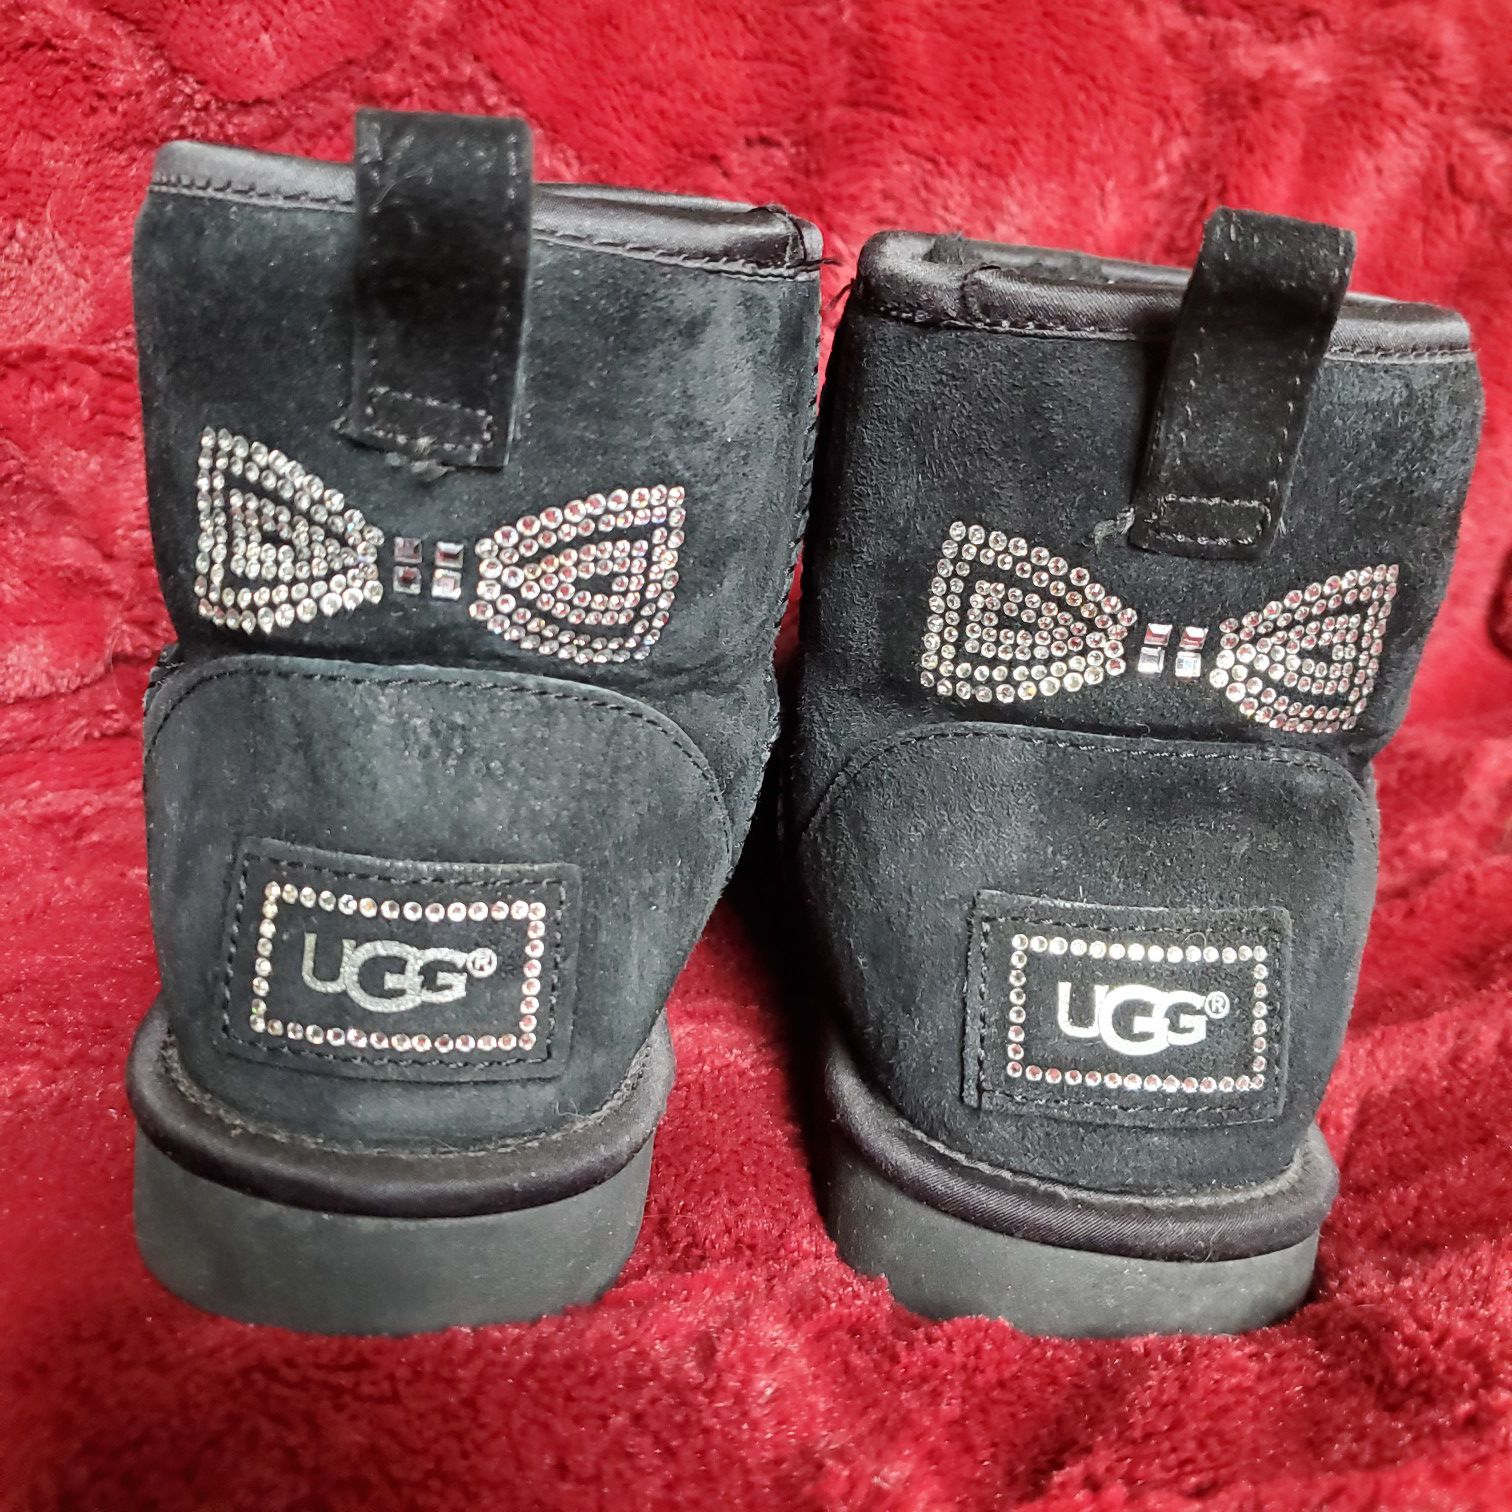 100% authentic Ugg mini boots